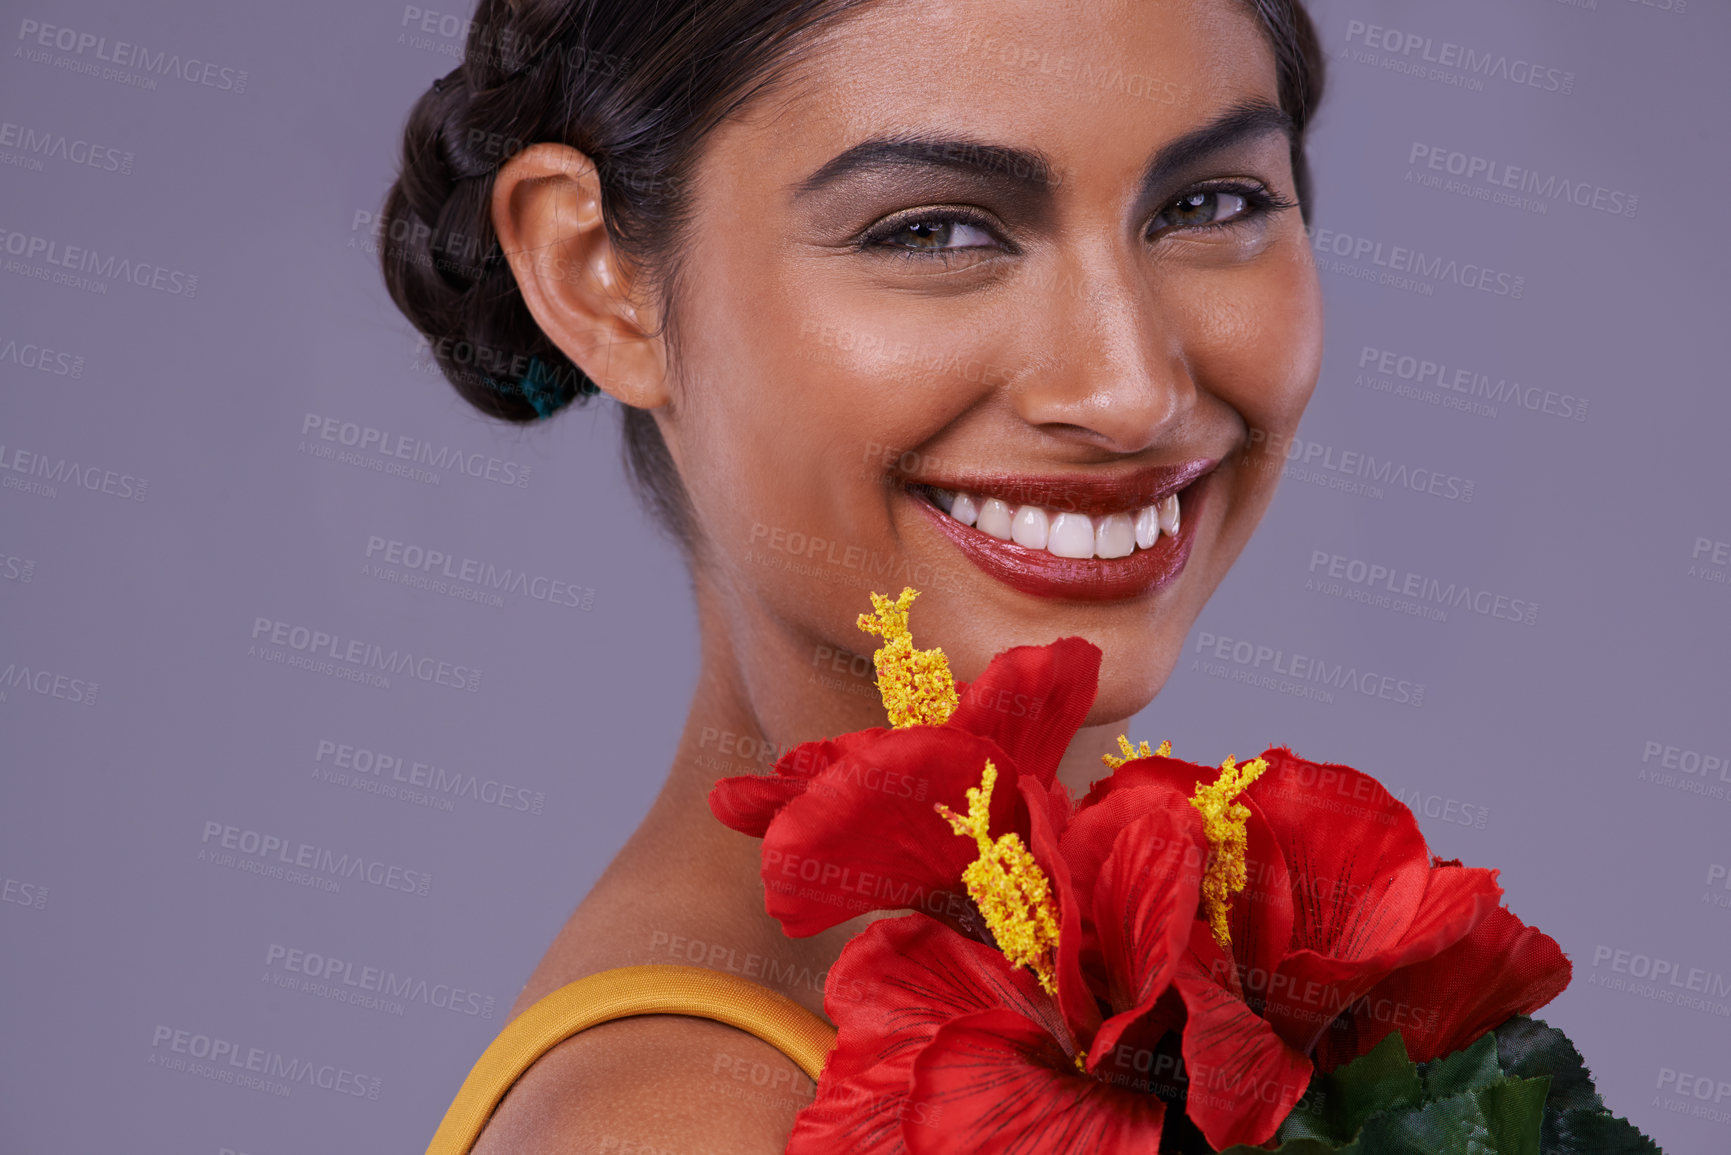 Buy stock photo Portrait, smile and woman with flowers for makeup, skincare or health isolated on a purple studio background in India. Face, person and cosmetics with bouquet for natural beauty with organic hibiscus